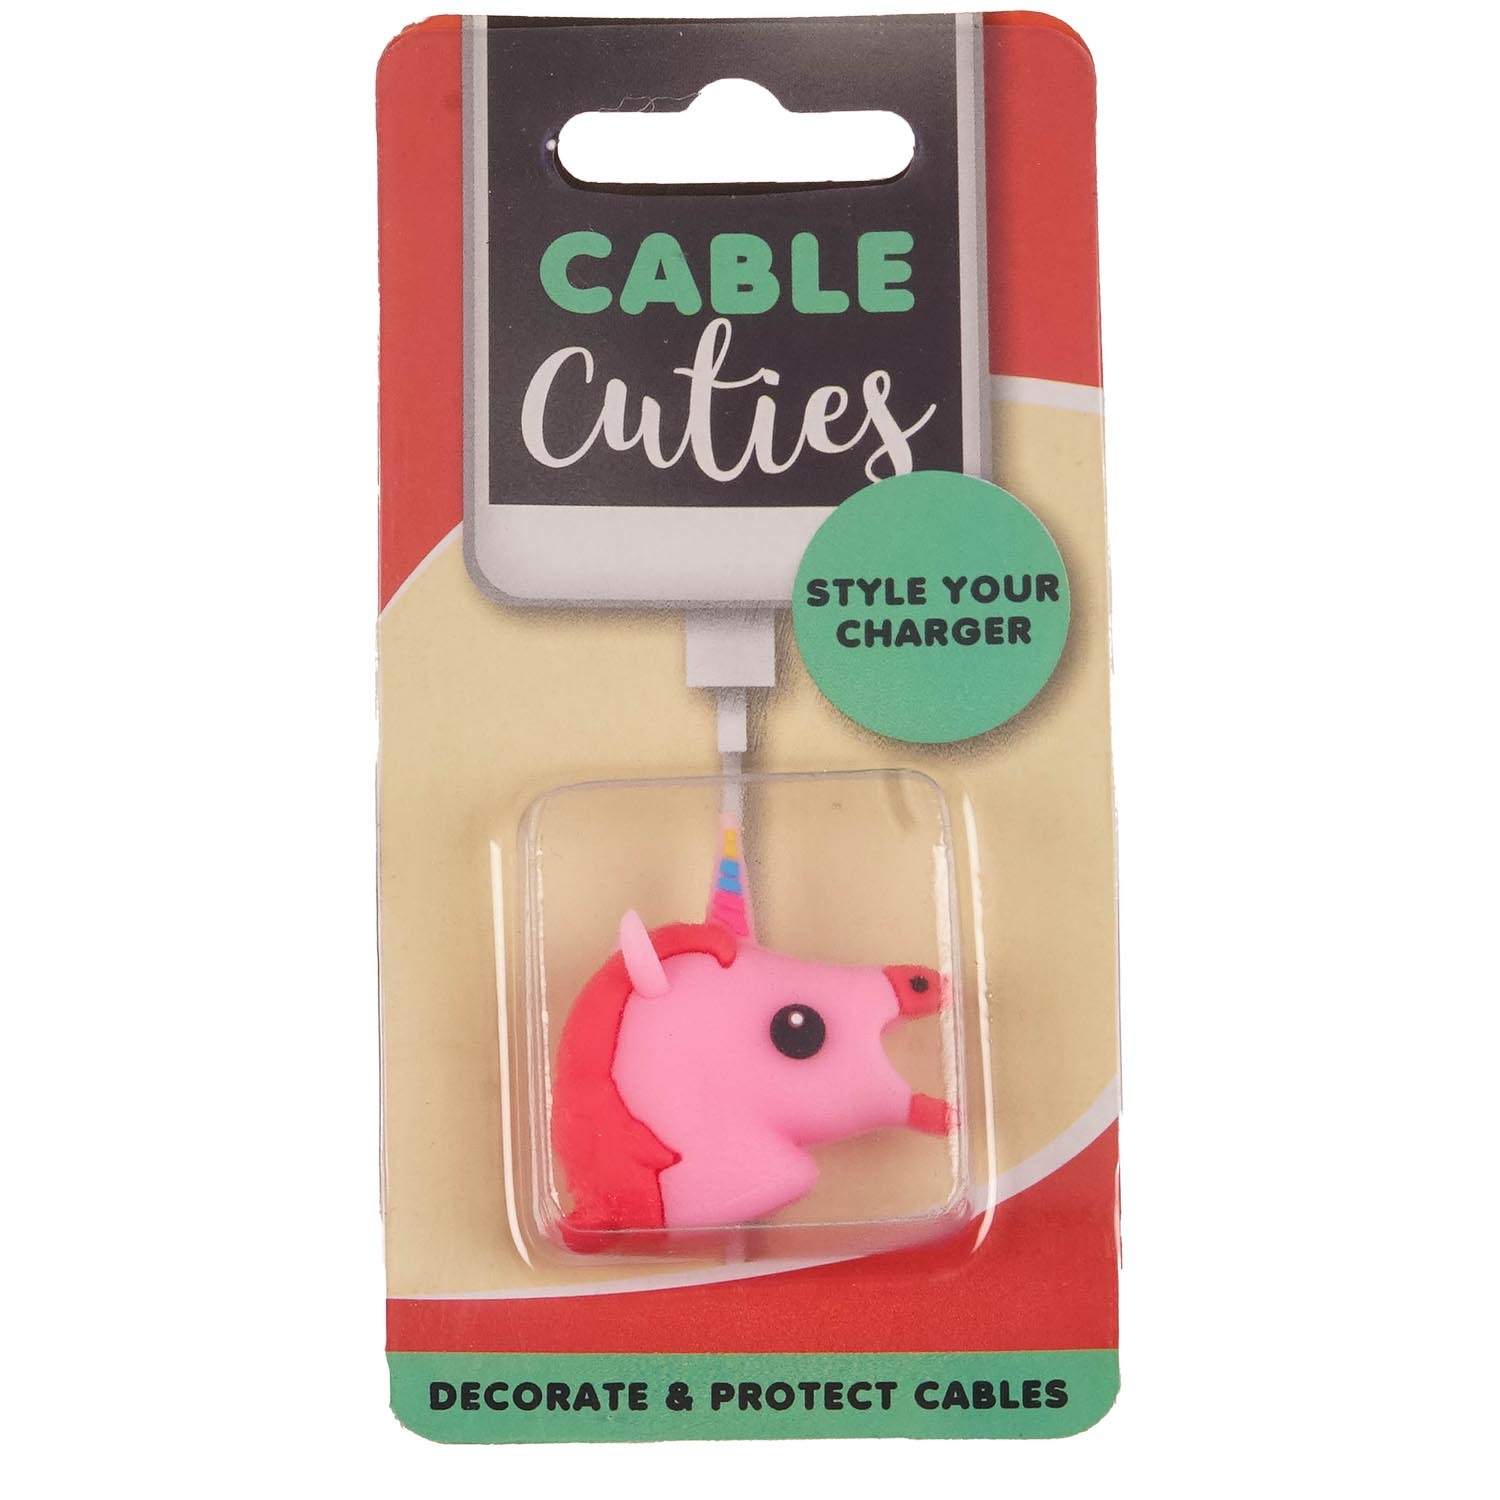 Cable Cuties Image 1